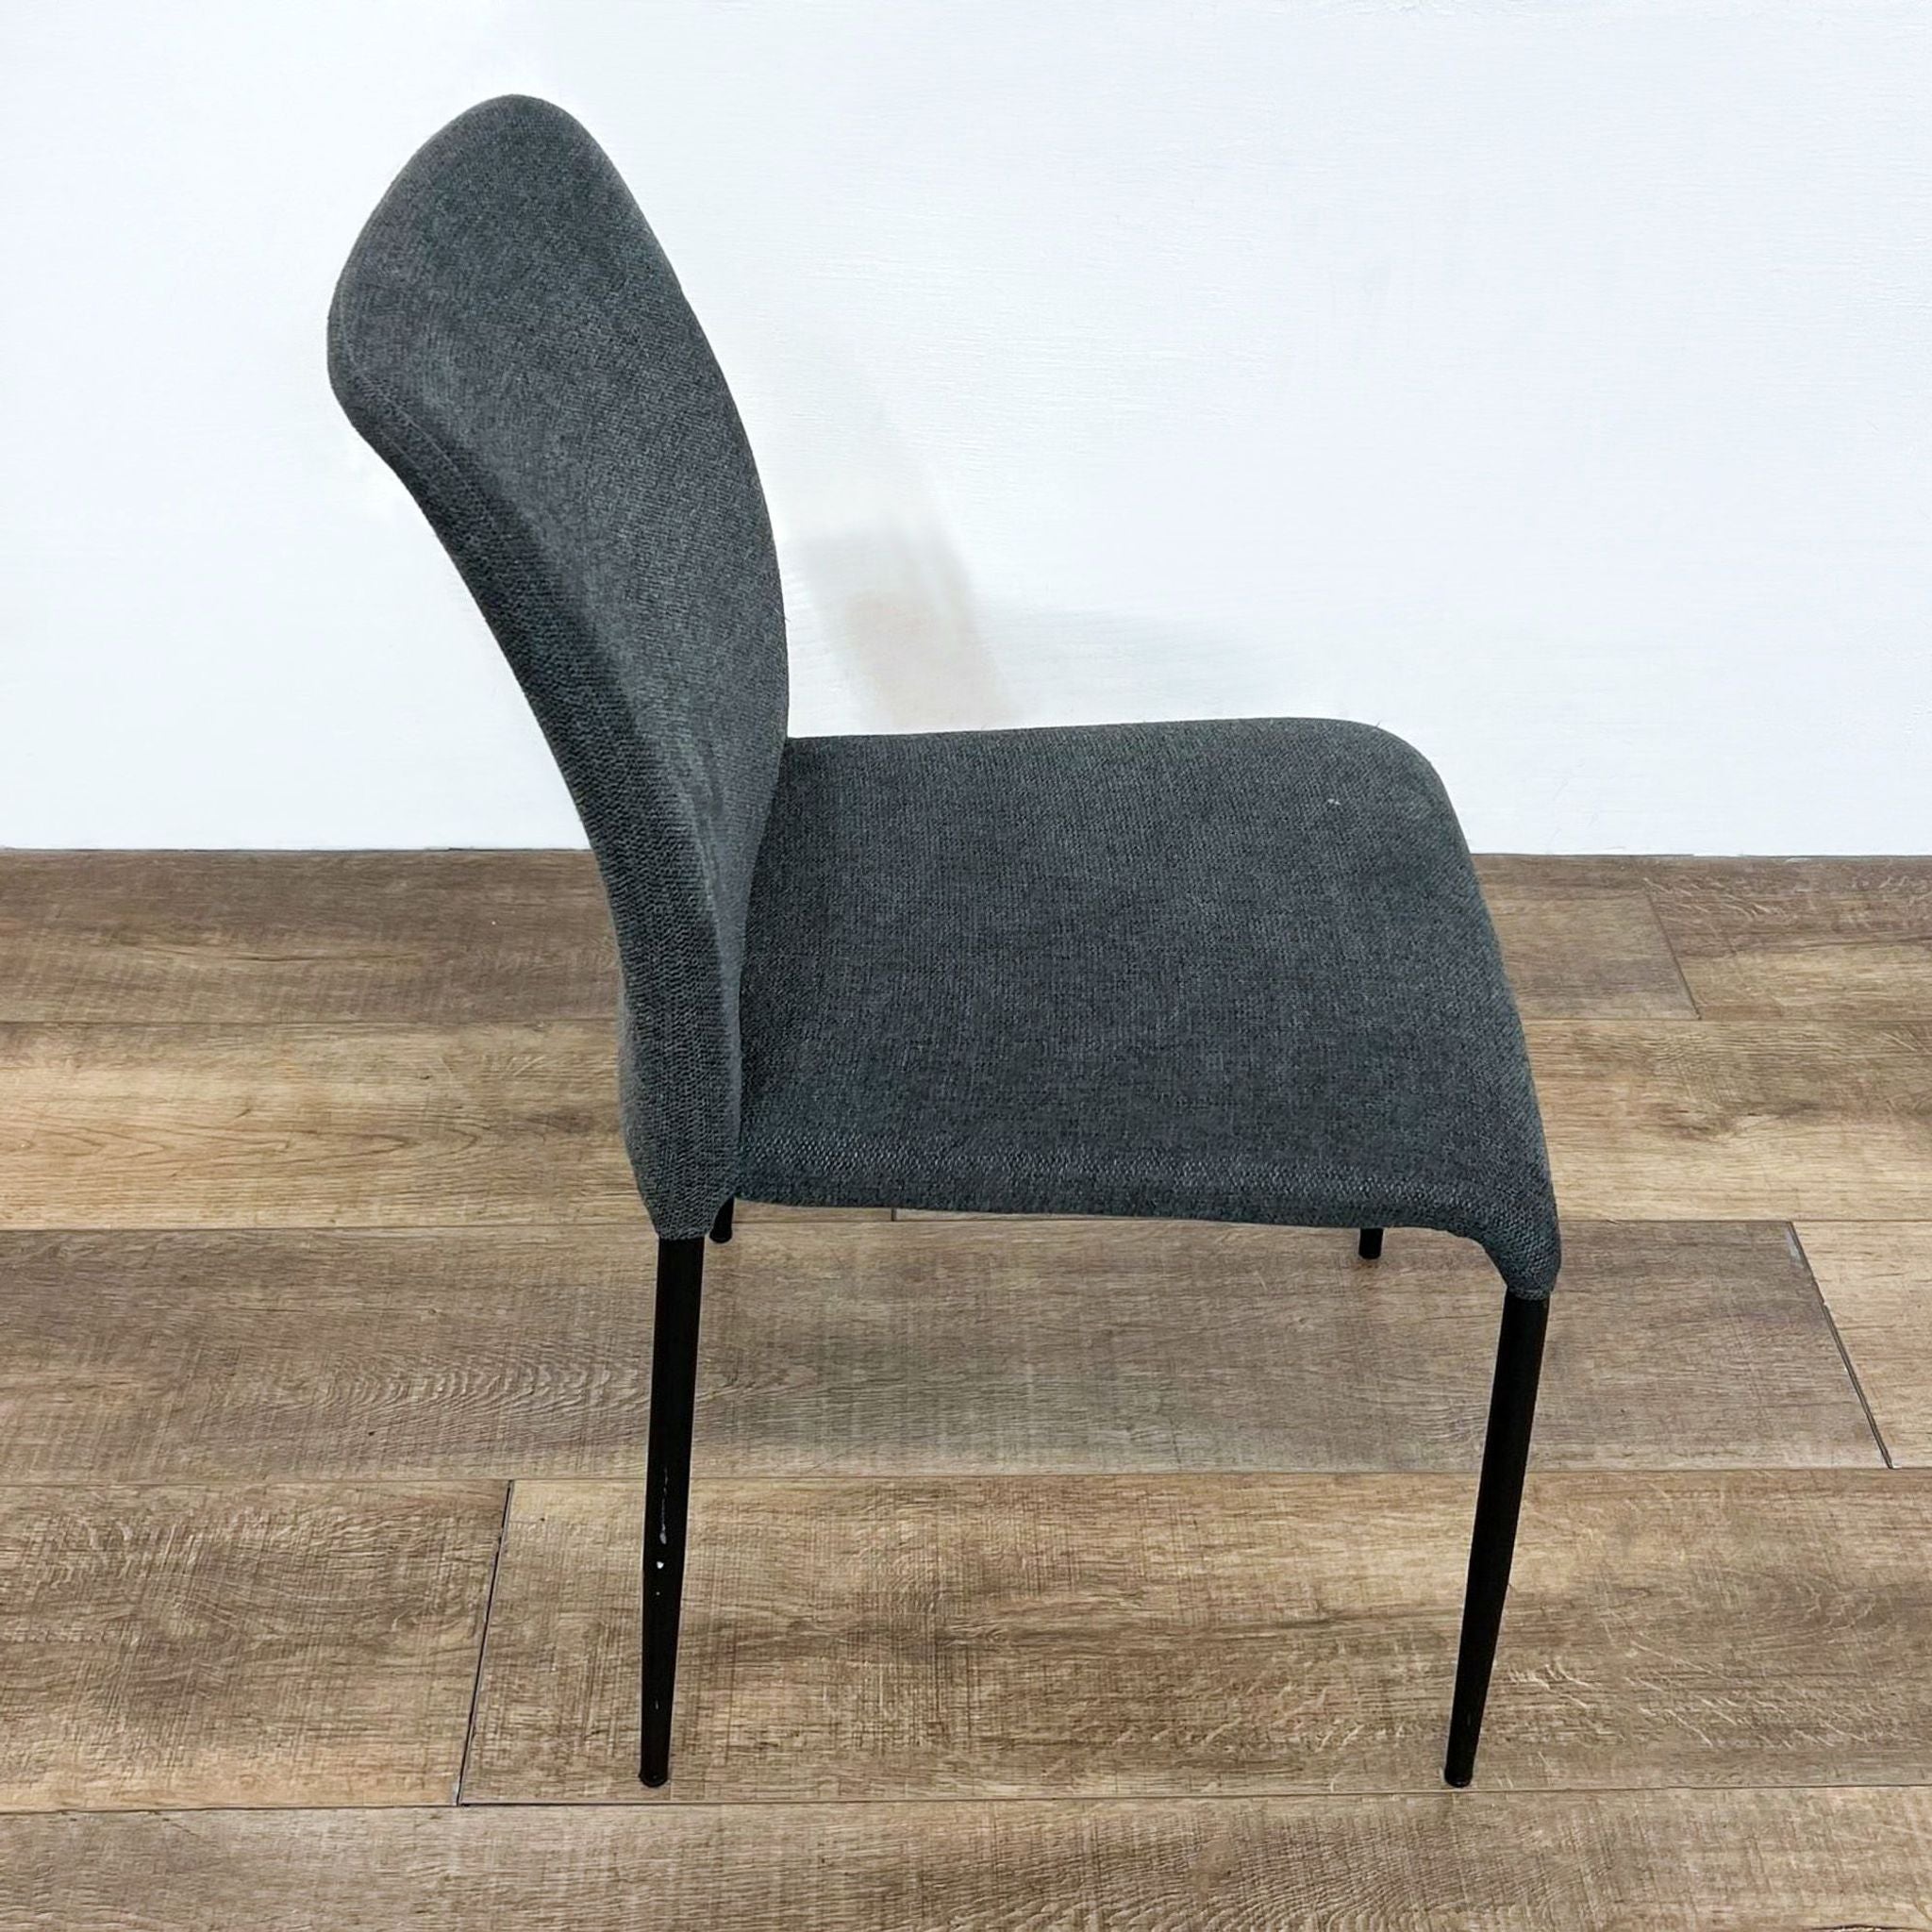 Charcoal upholstered Reperch dining chair with curved backrest and sleek tapered legs, angled side view.